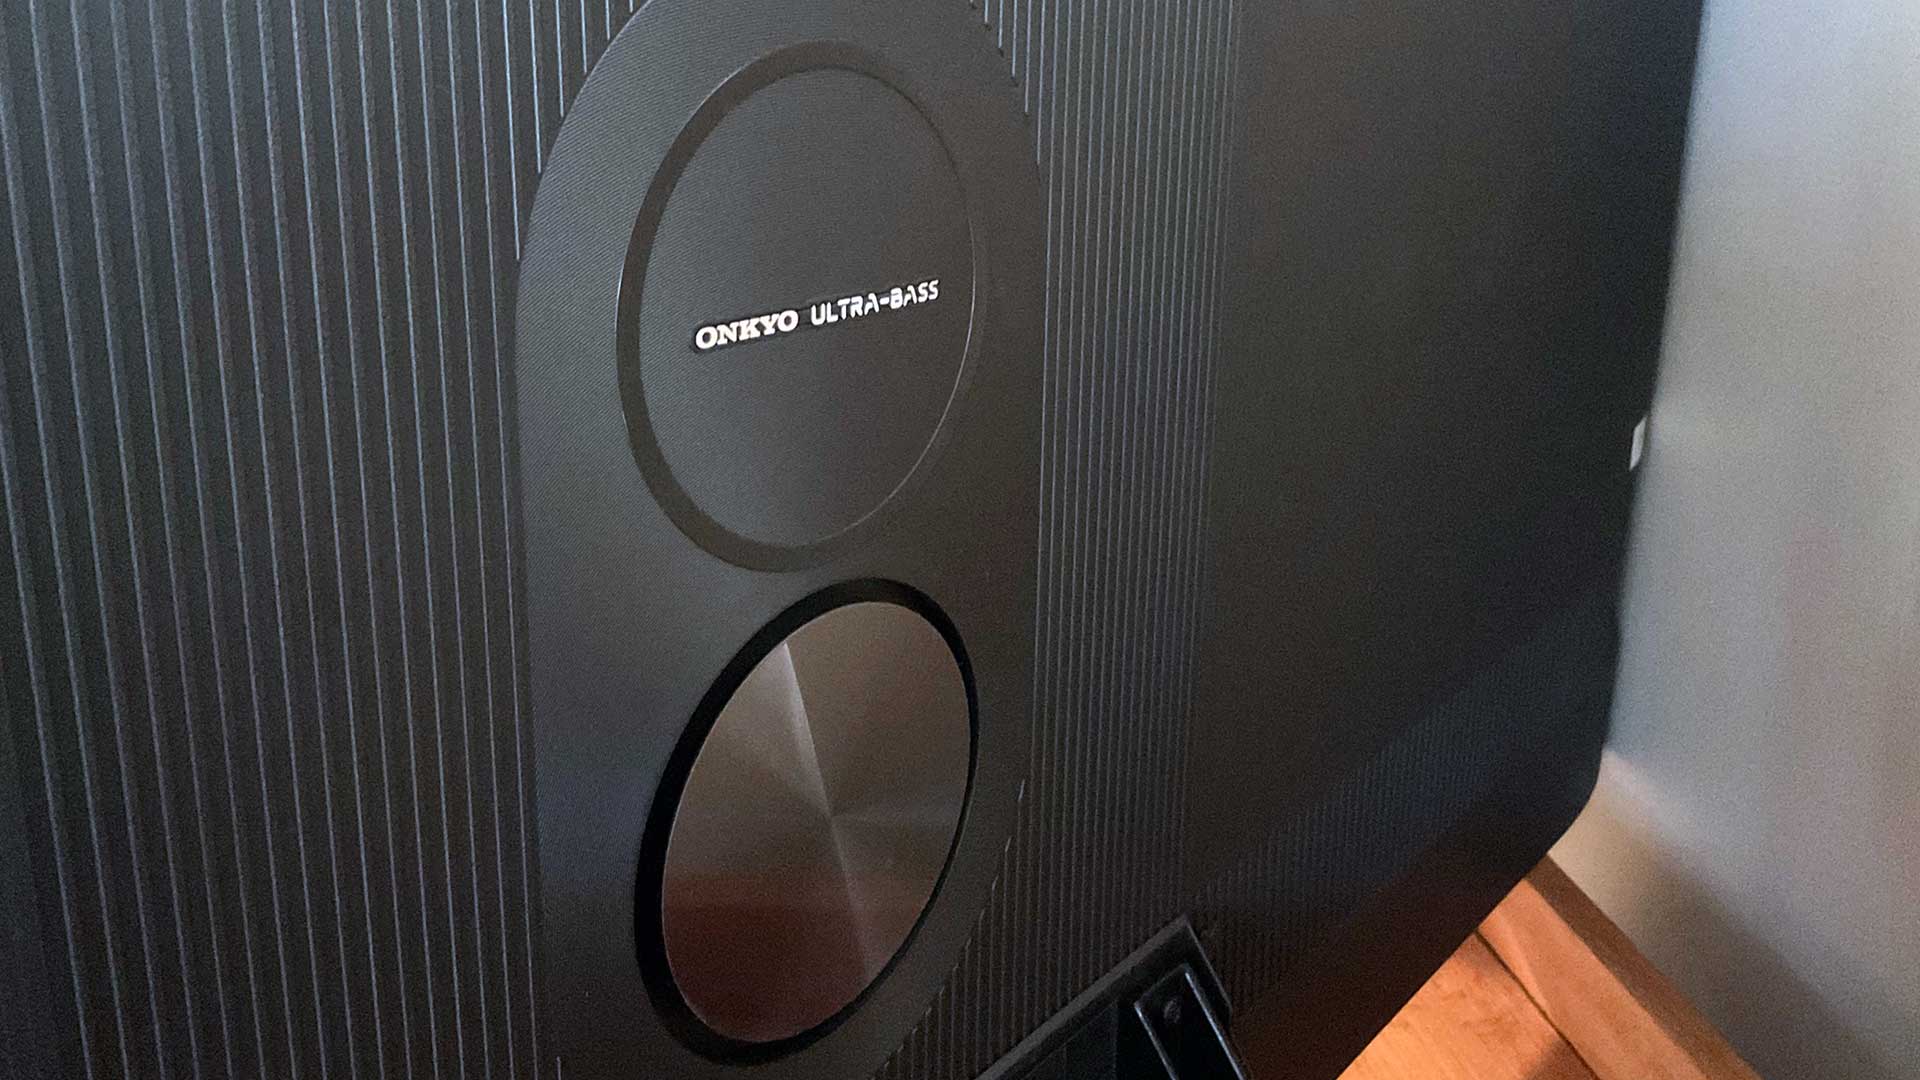 The Onkyo-branded 'subwoofer' on the rear of the TCL C835